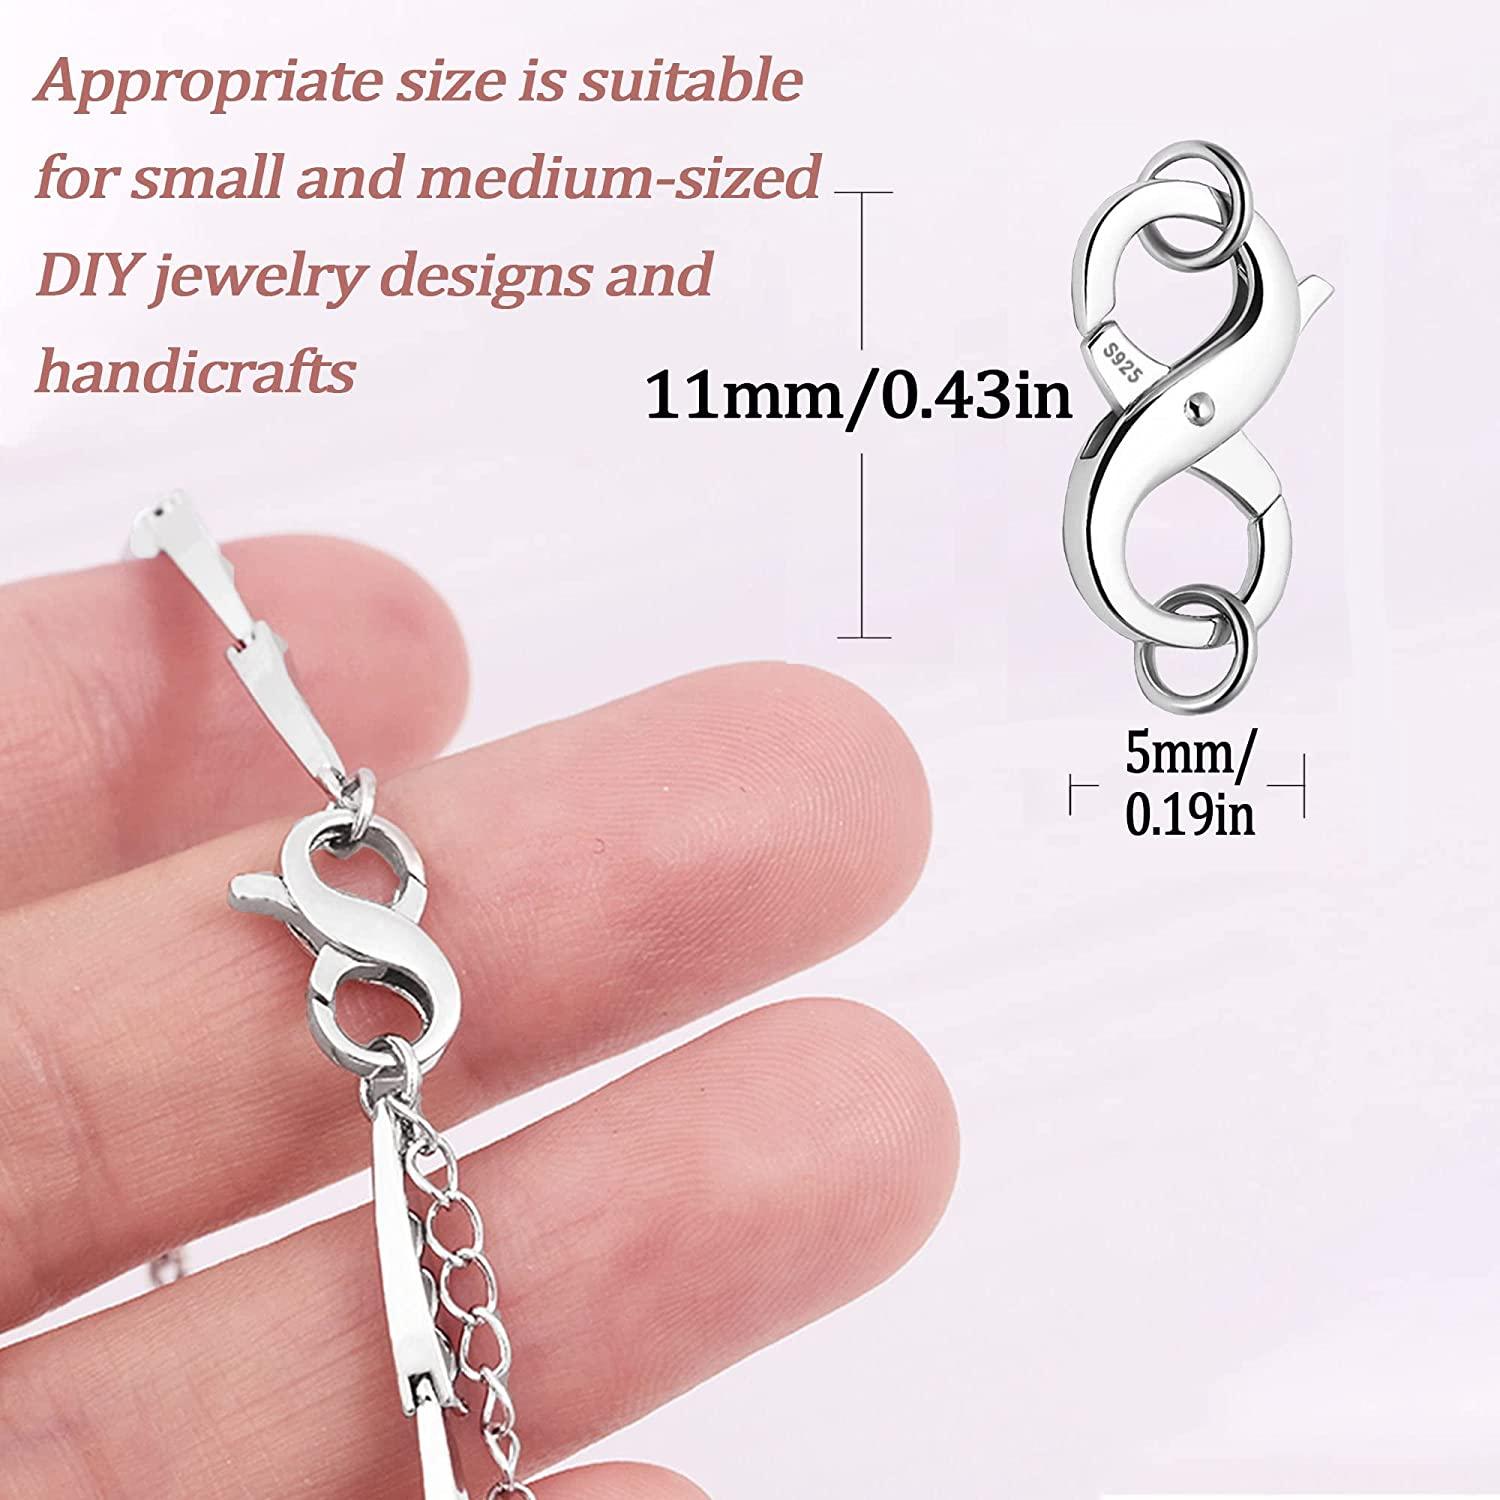 KINBOM 2pcs Lobster Clasp, Jewelry Clasp Double Opening Lobster Clasp  Necklace Shortener 925 Sterling Silver Jewelry Making Supplies Clasp Repair  Kit